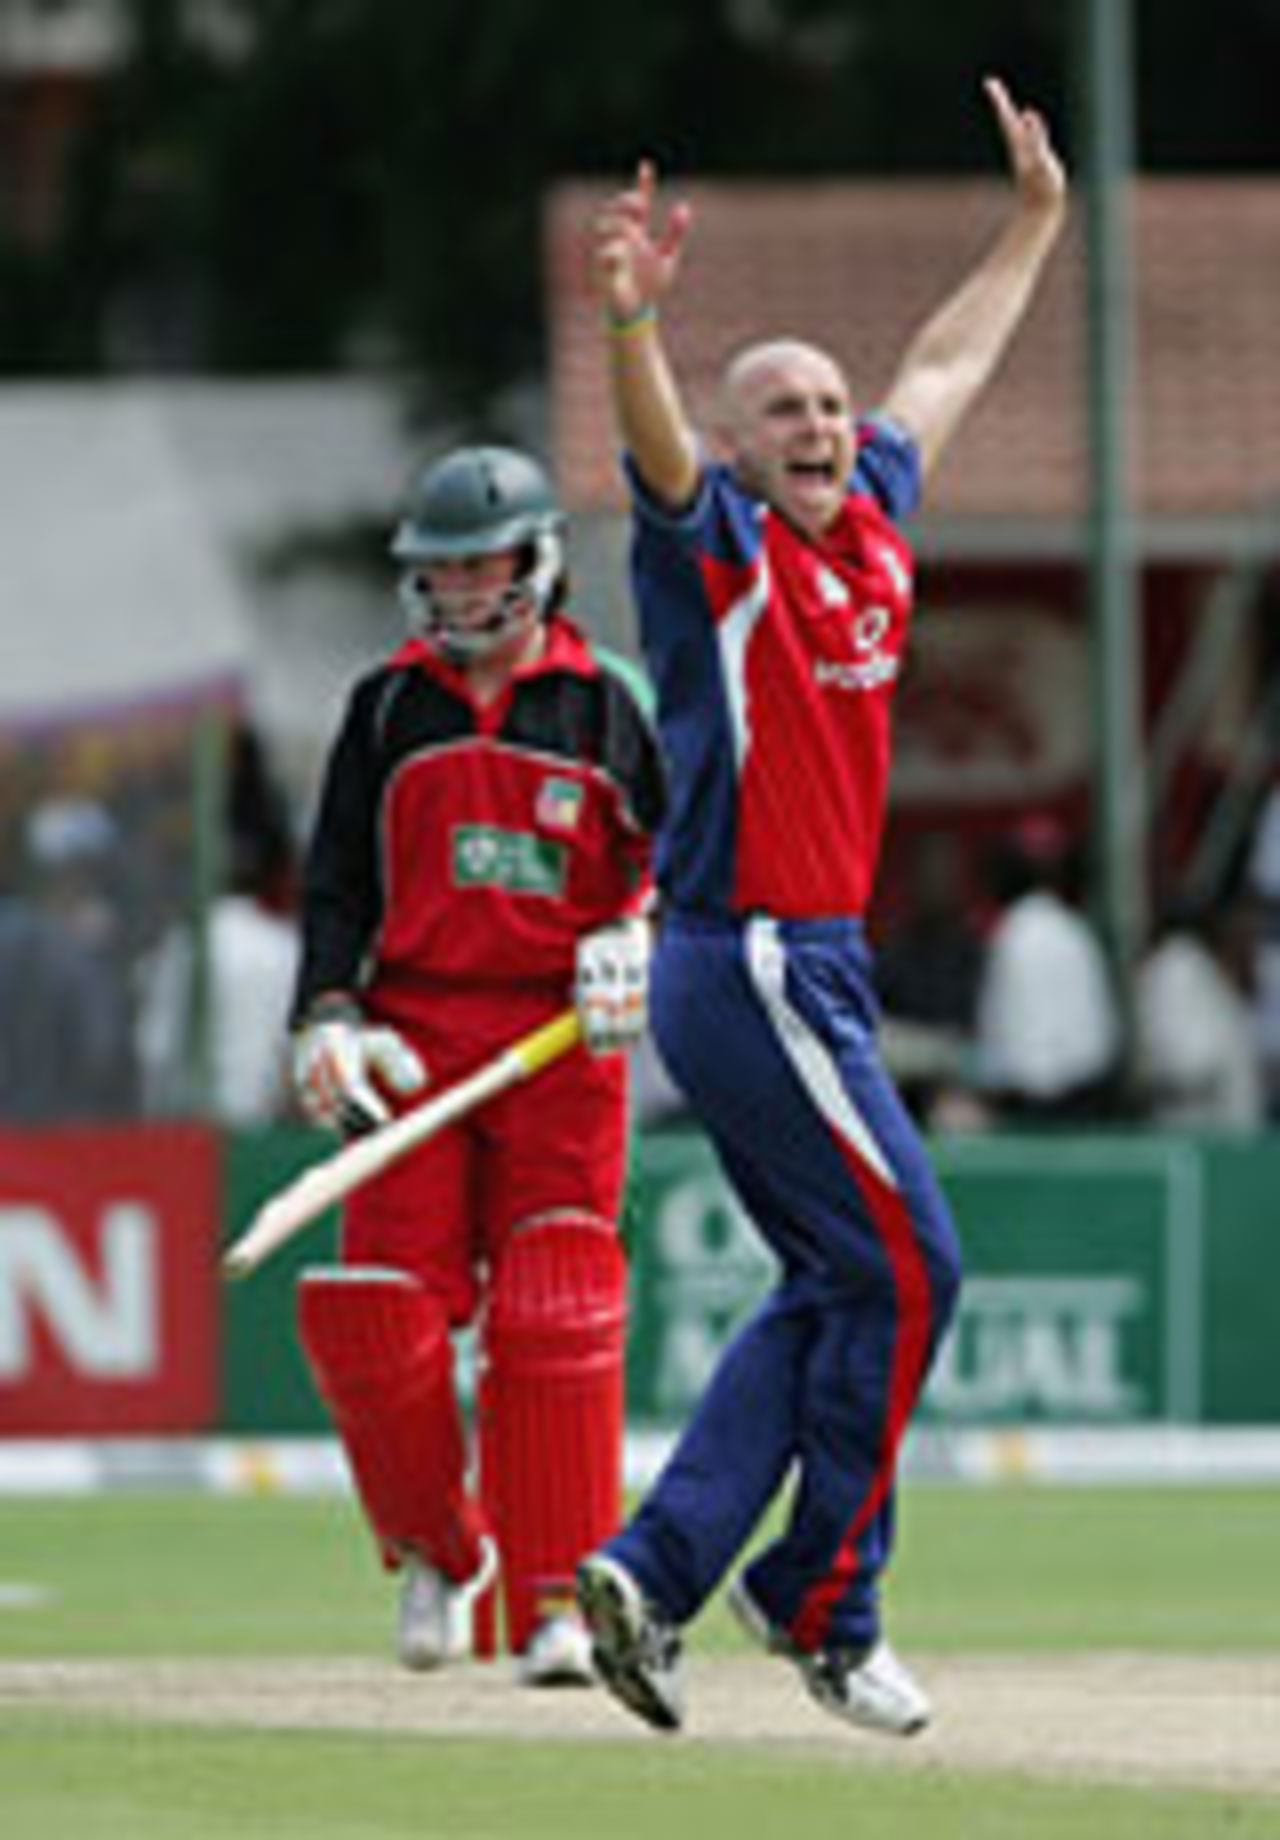 Alex Wharf wins his appeal against Brendan Taylor, Zimbabwe v England, 2nd ODI, Harare, December 1 2004